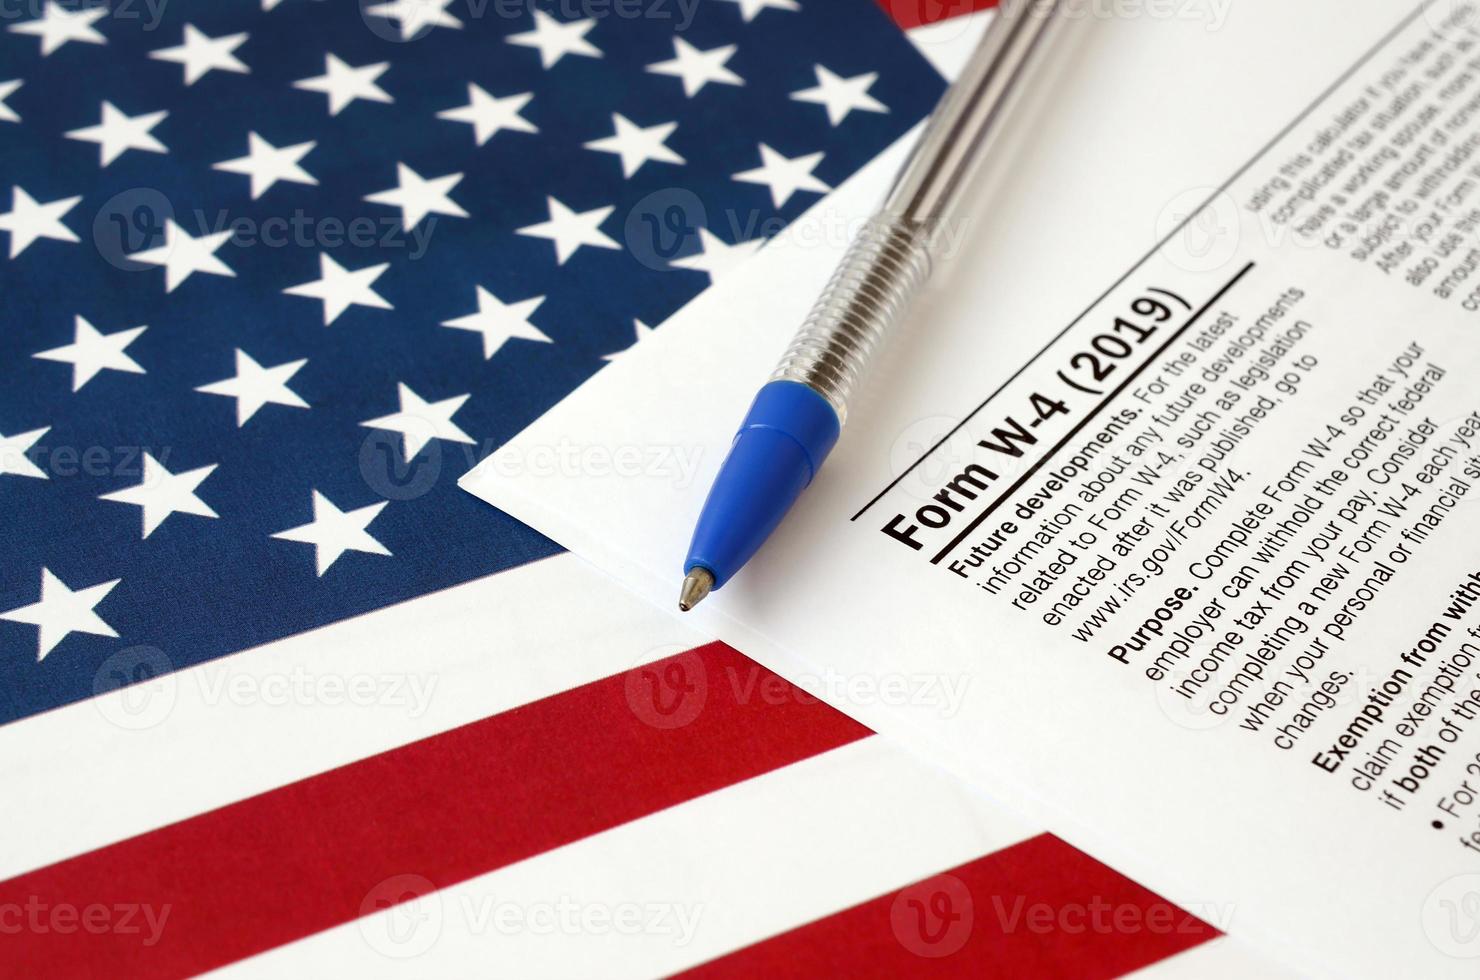 Form W-4 Employee's withholding allowance certificate instructions and blue pen on United States flag. Internal revenue service tax form photo